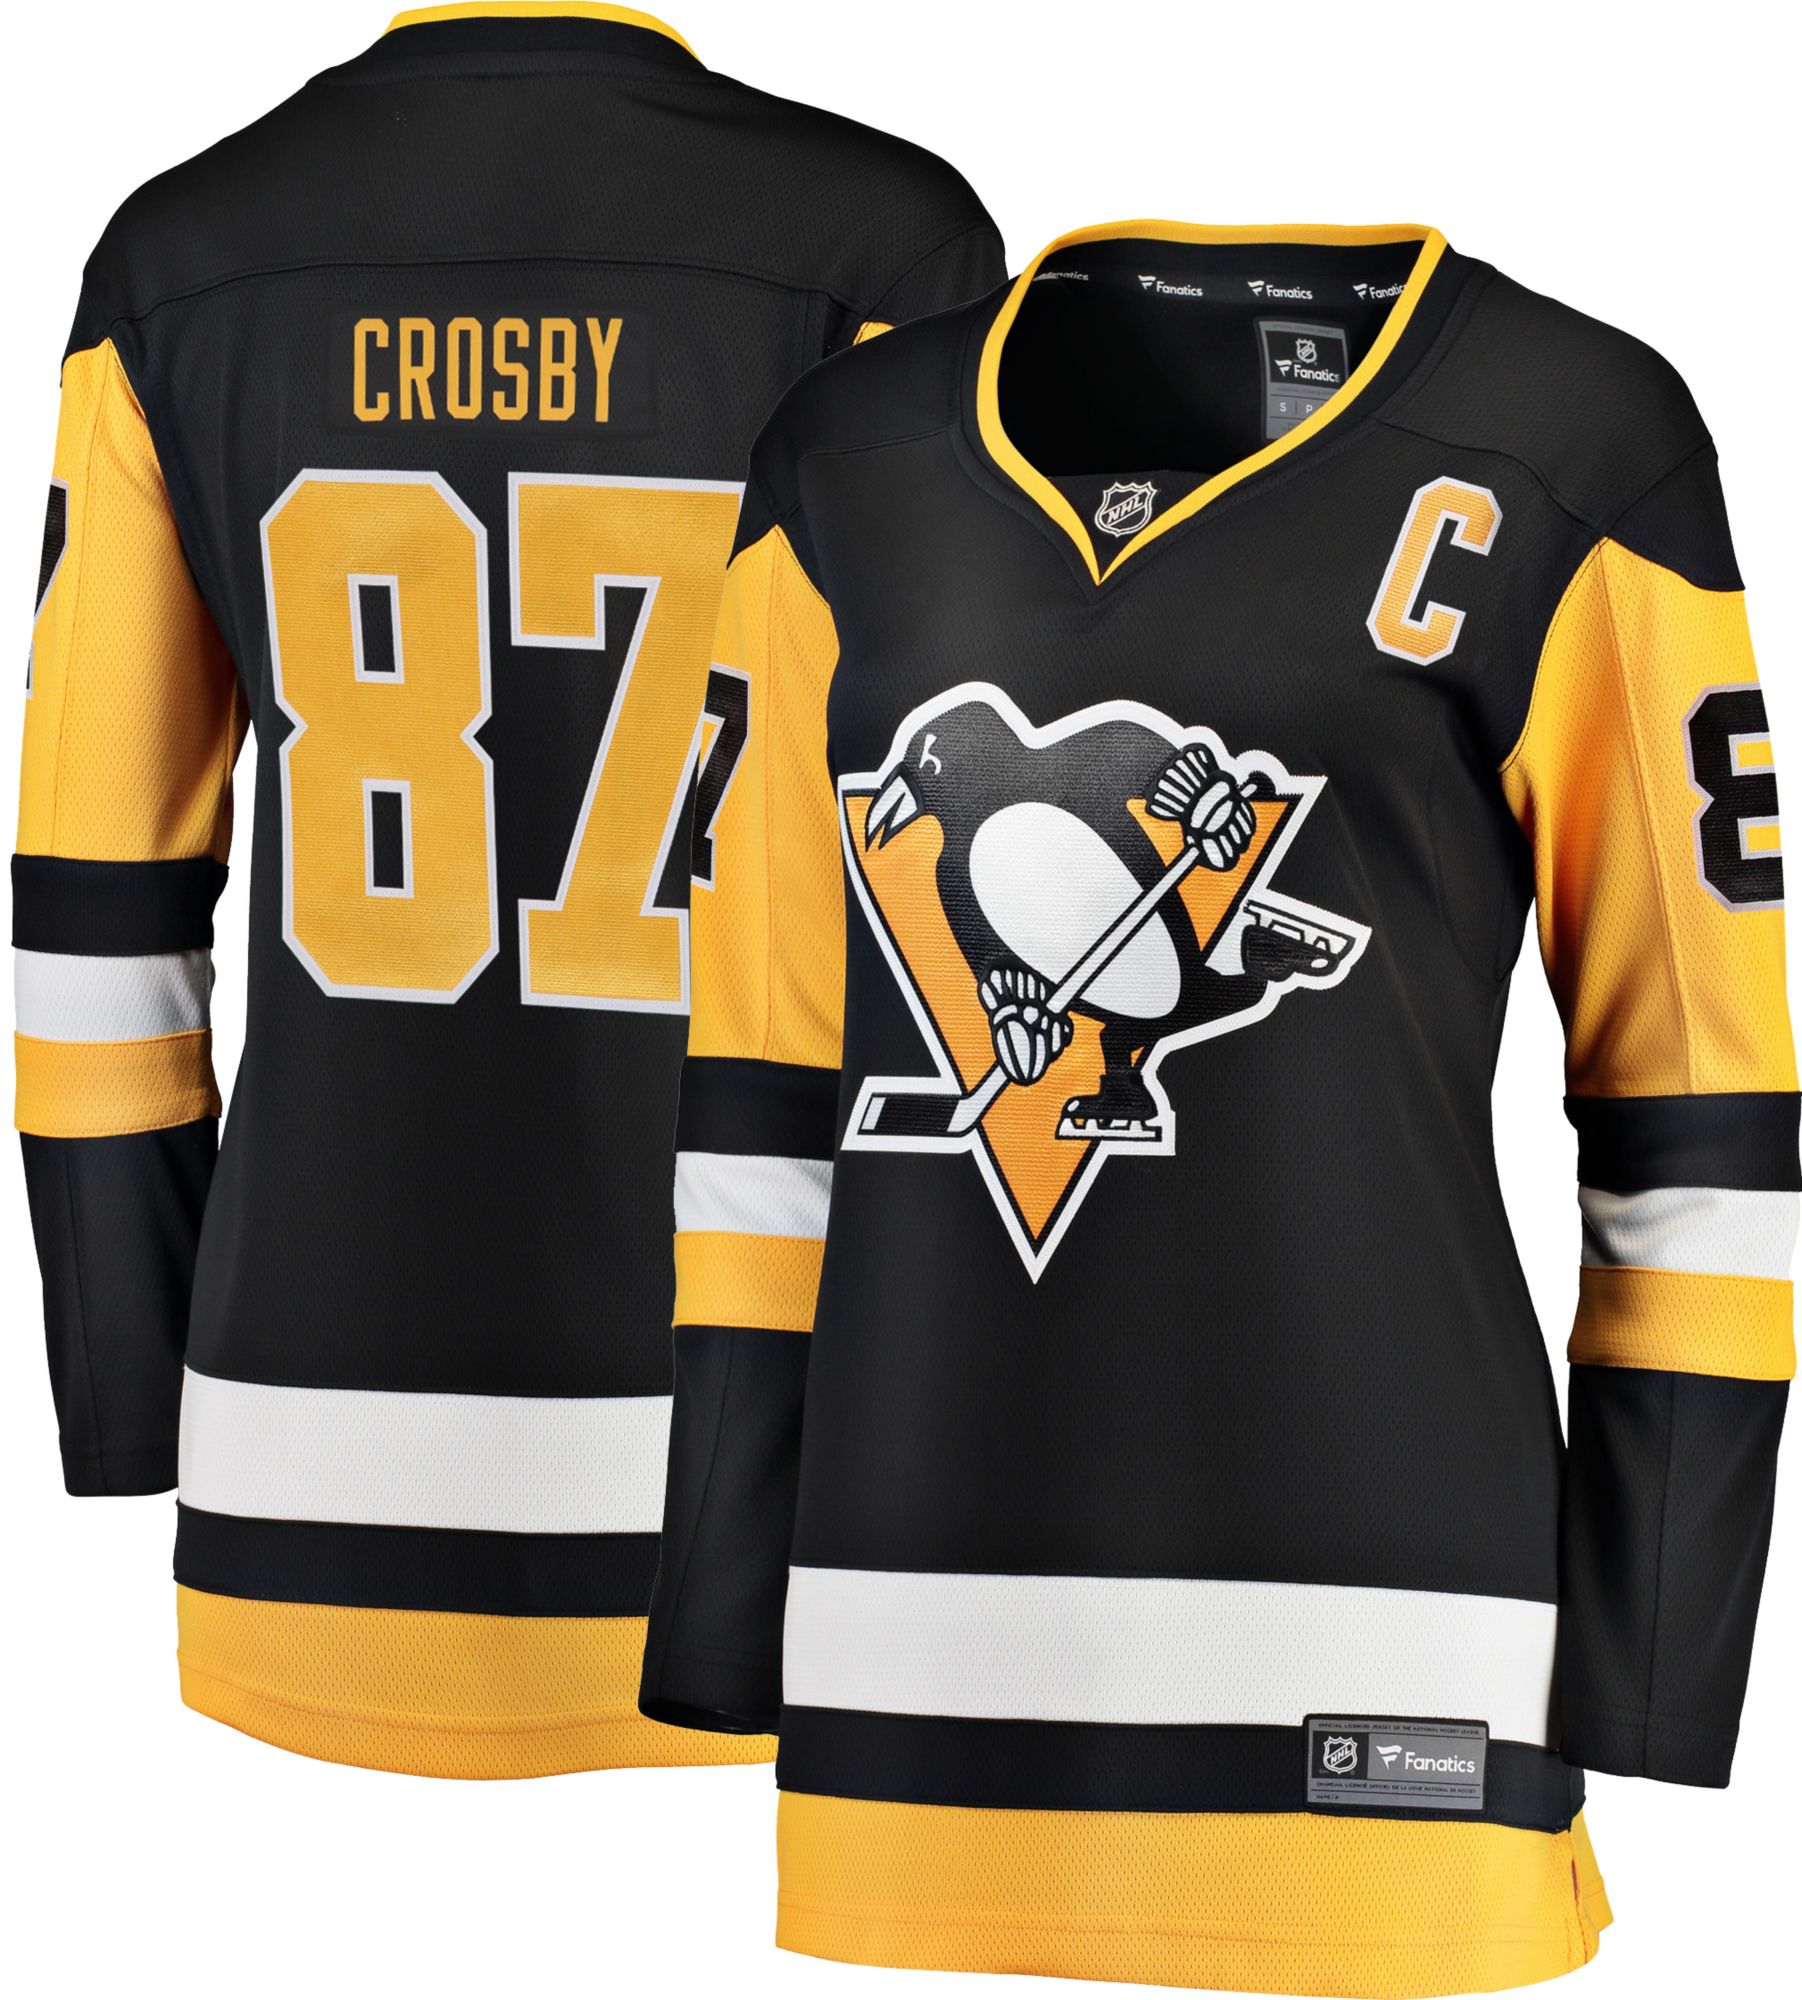 pittsburgh penguins sidney crosby jersey